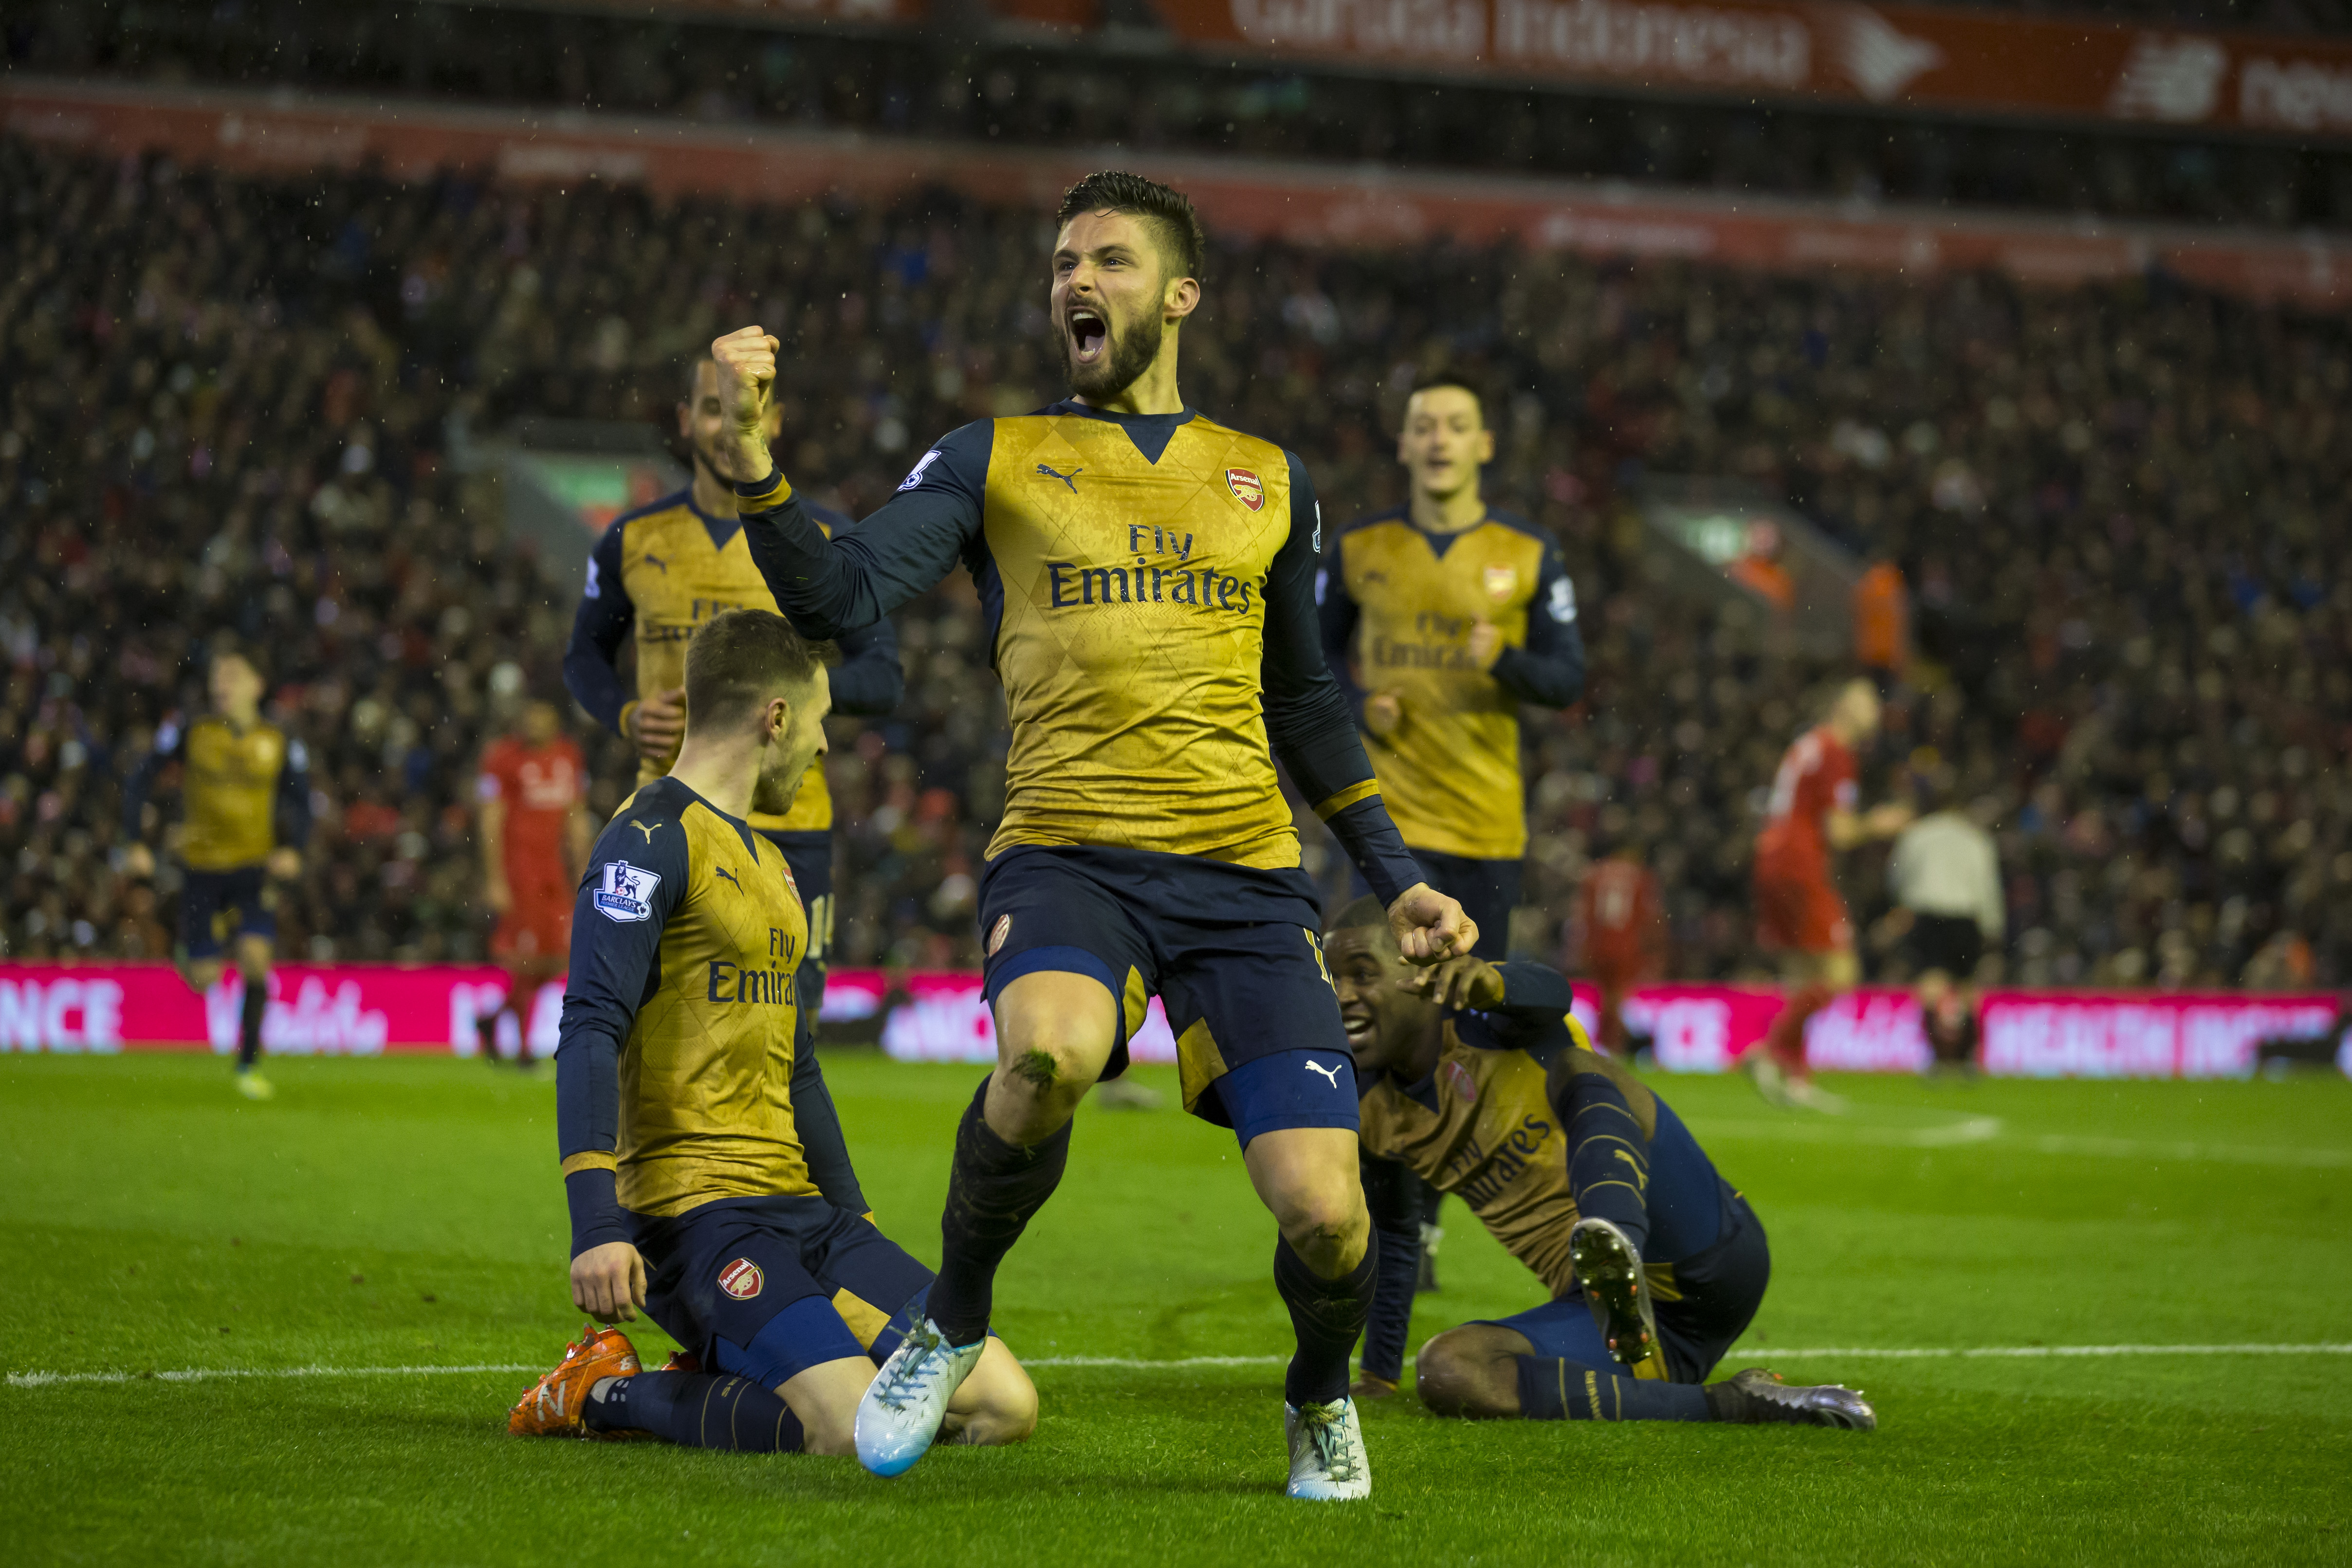 Arsenal's Olivier Giroud, centre, celebrates with teammates after scoring his second goal during the English Premier League soccer match between Liverpool and Arsenal at Anfield Stadium, Liverpool, England, Wednesday, Jan. 13, 2016. AP